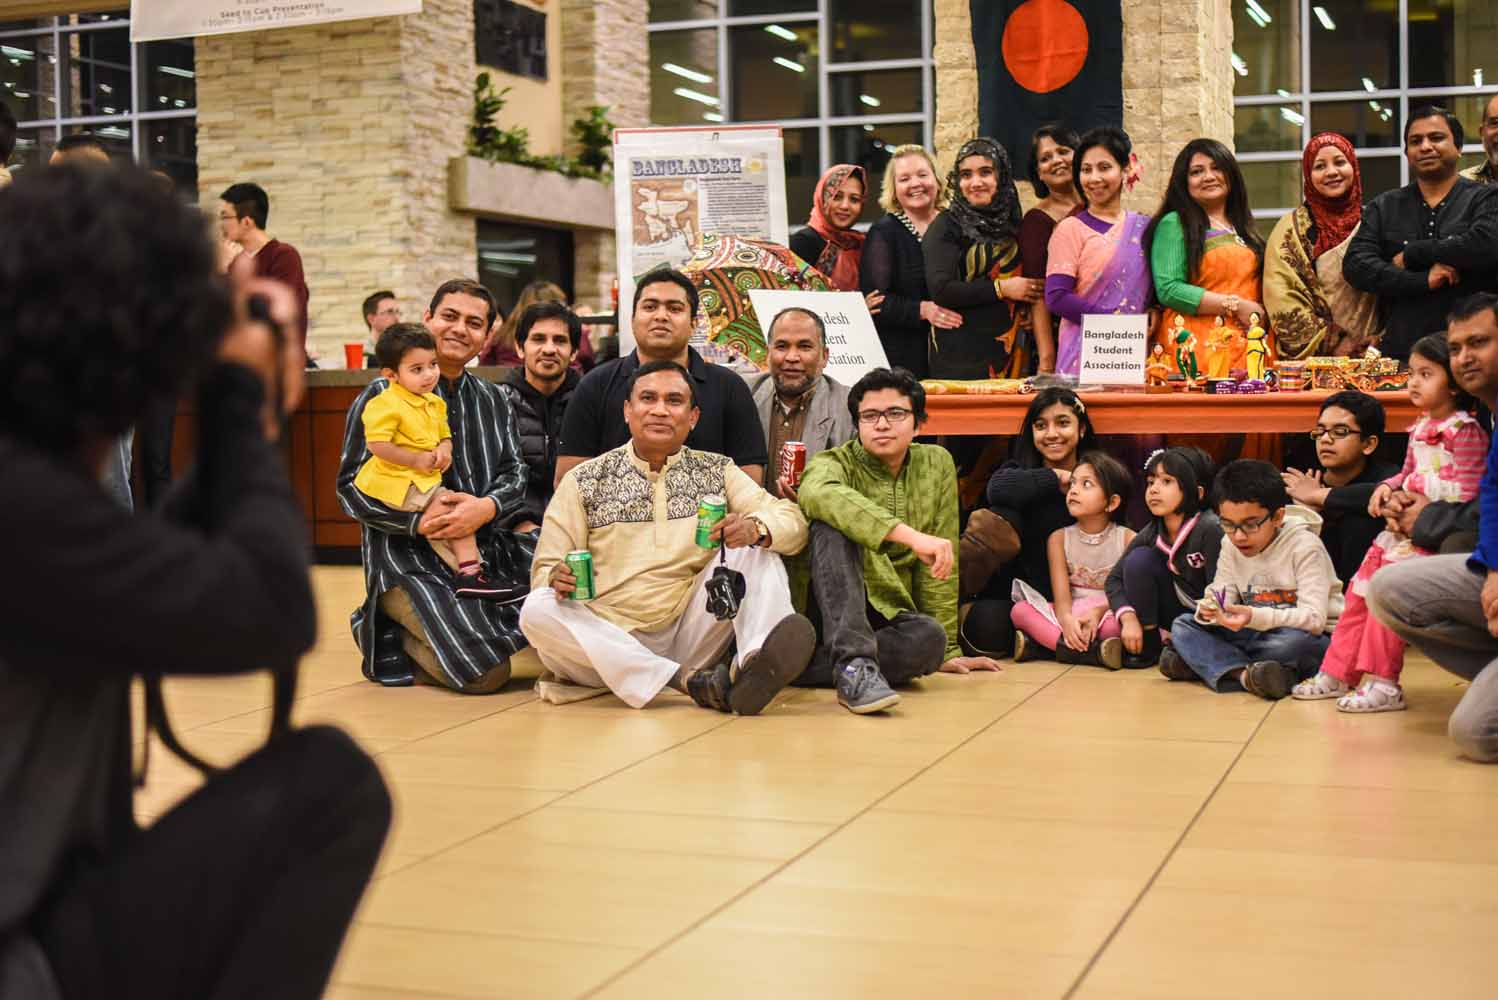 The Bangladesh Student Association joined together for a group picture at the International Welcome Party at the MU Student Center on Saturday, Feb. 6, 2016. (Photo by Morgan Lieberman)